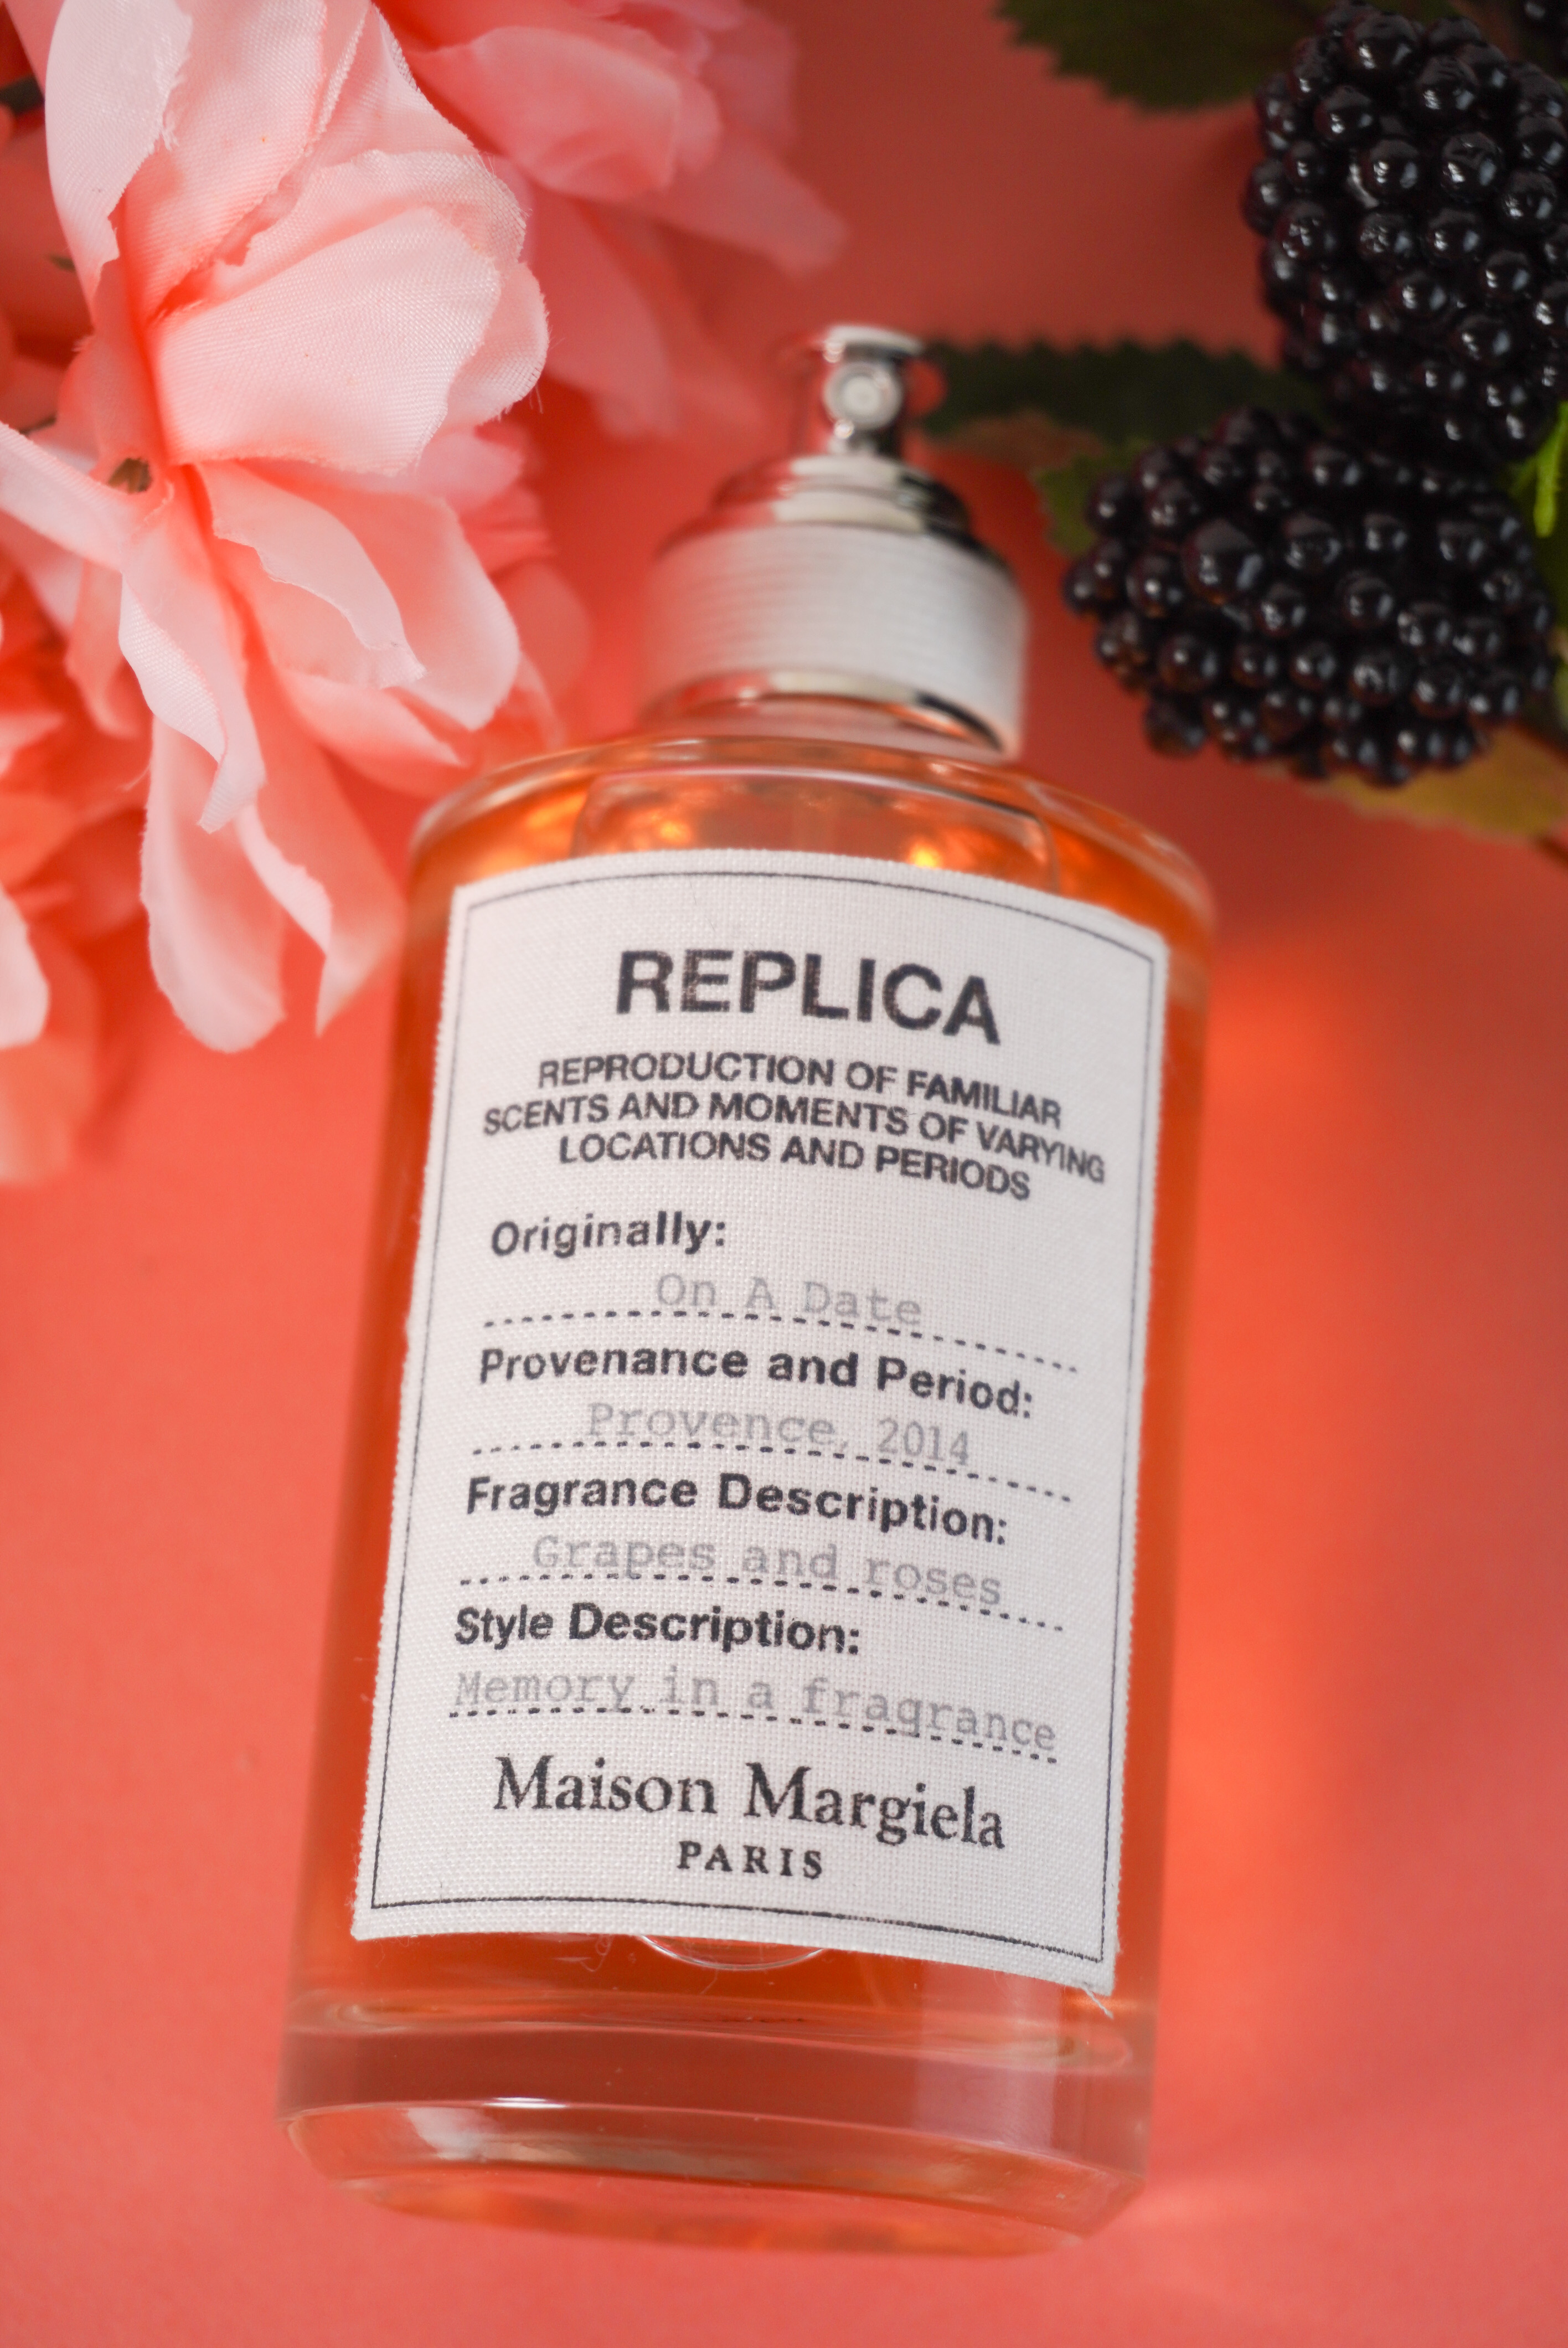 Image of the Masion Margiela fragrance face up with a pink flower on the left and blackberries on the right.